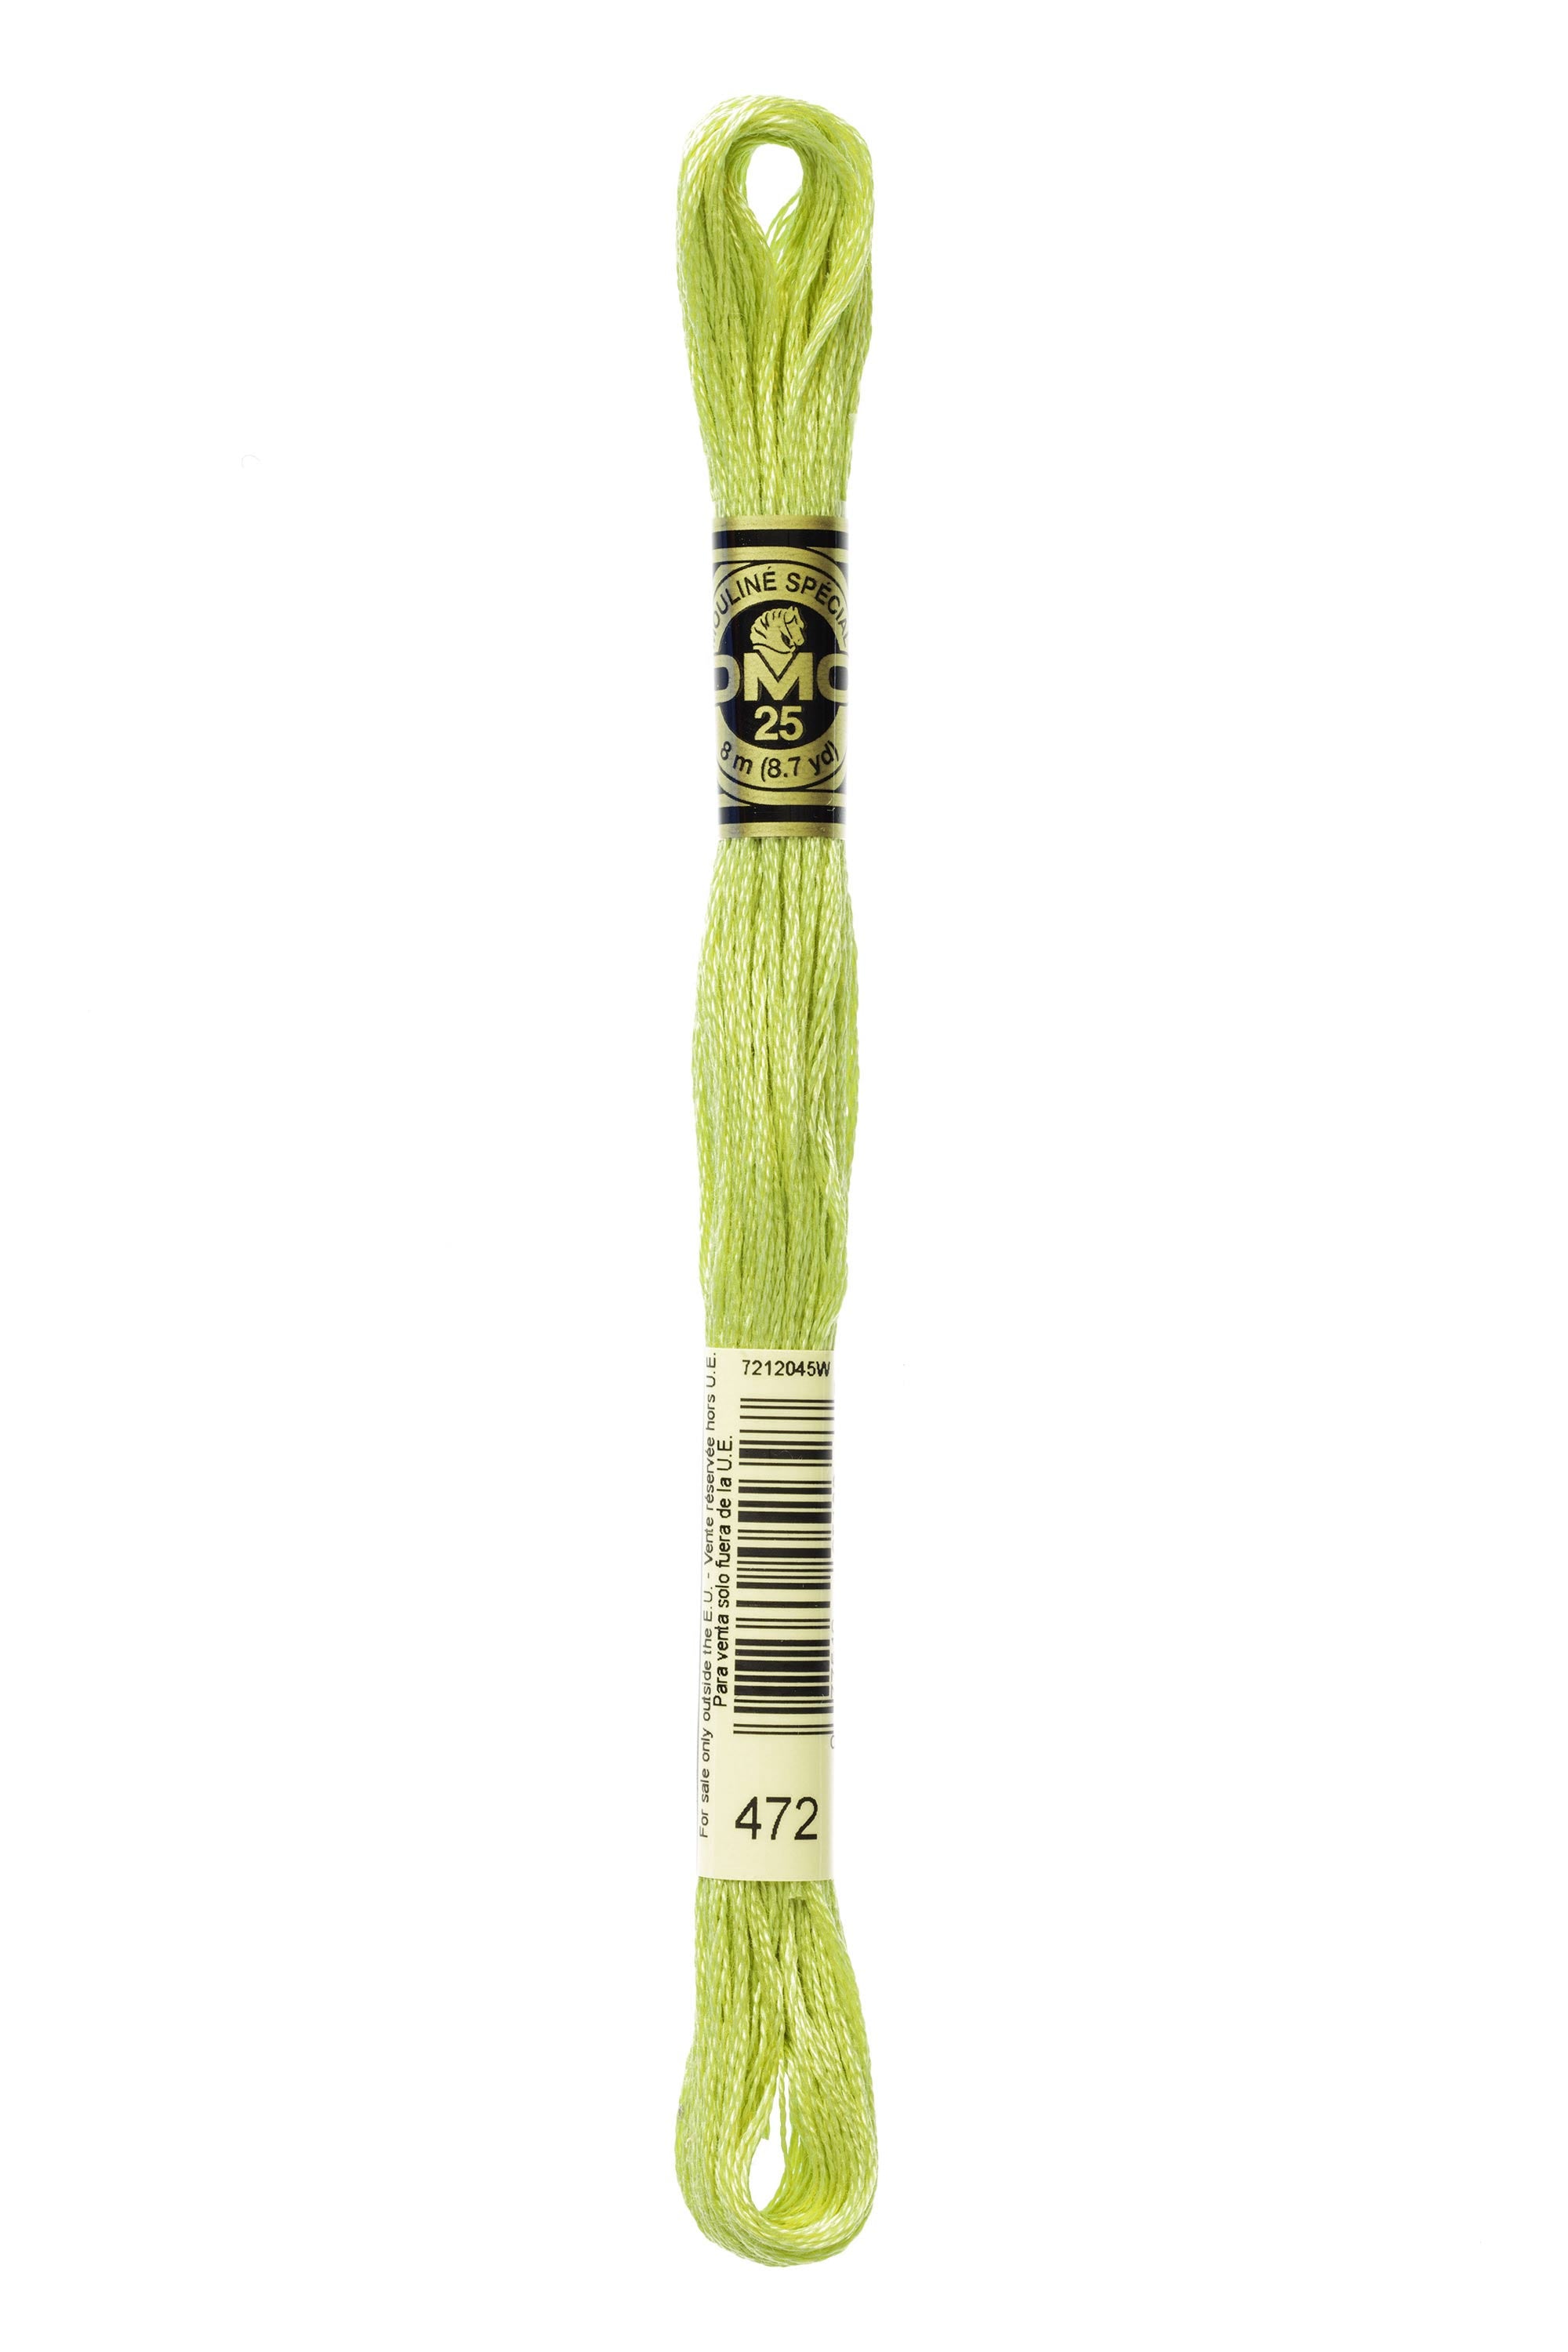 Six Strand Floss, DMC  (Green Forest Colors) 100% Cotton